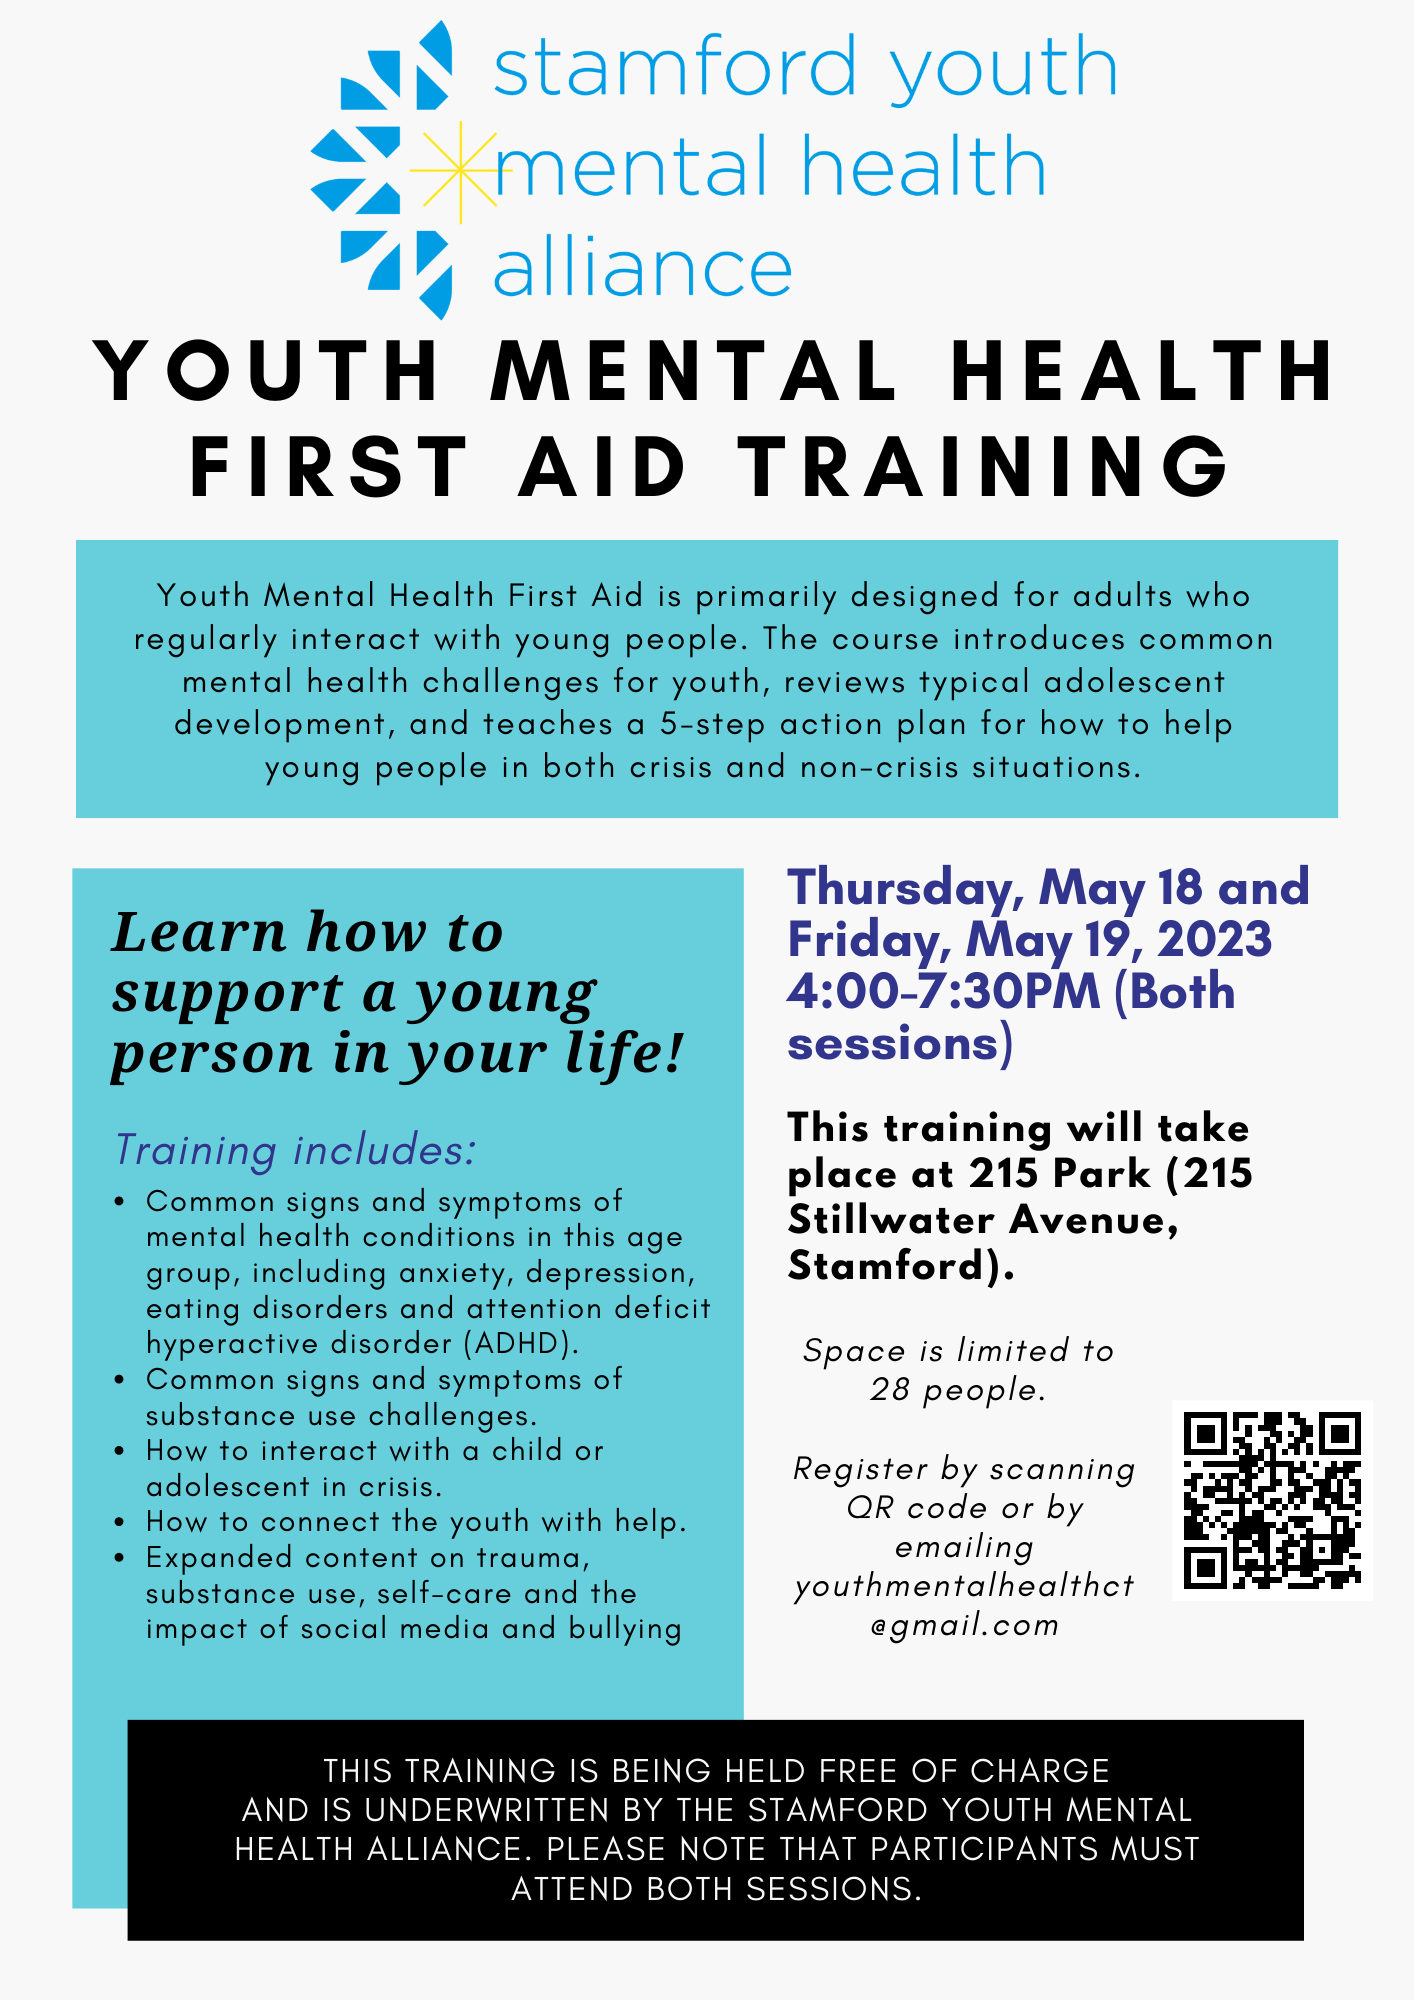 May 18 And 19 Youth Mental Health First Aid Training Stamford Youth Mental Health Alliance